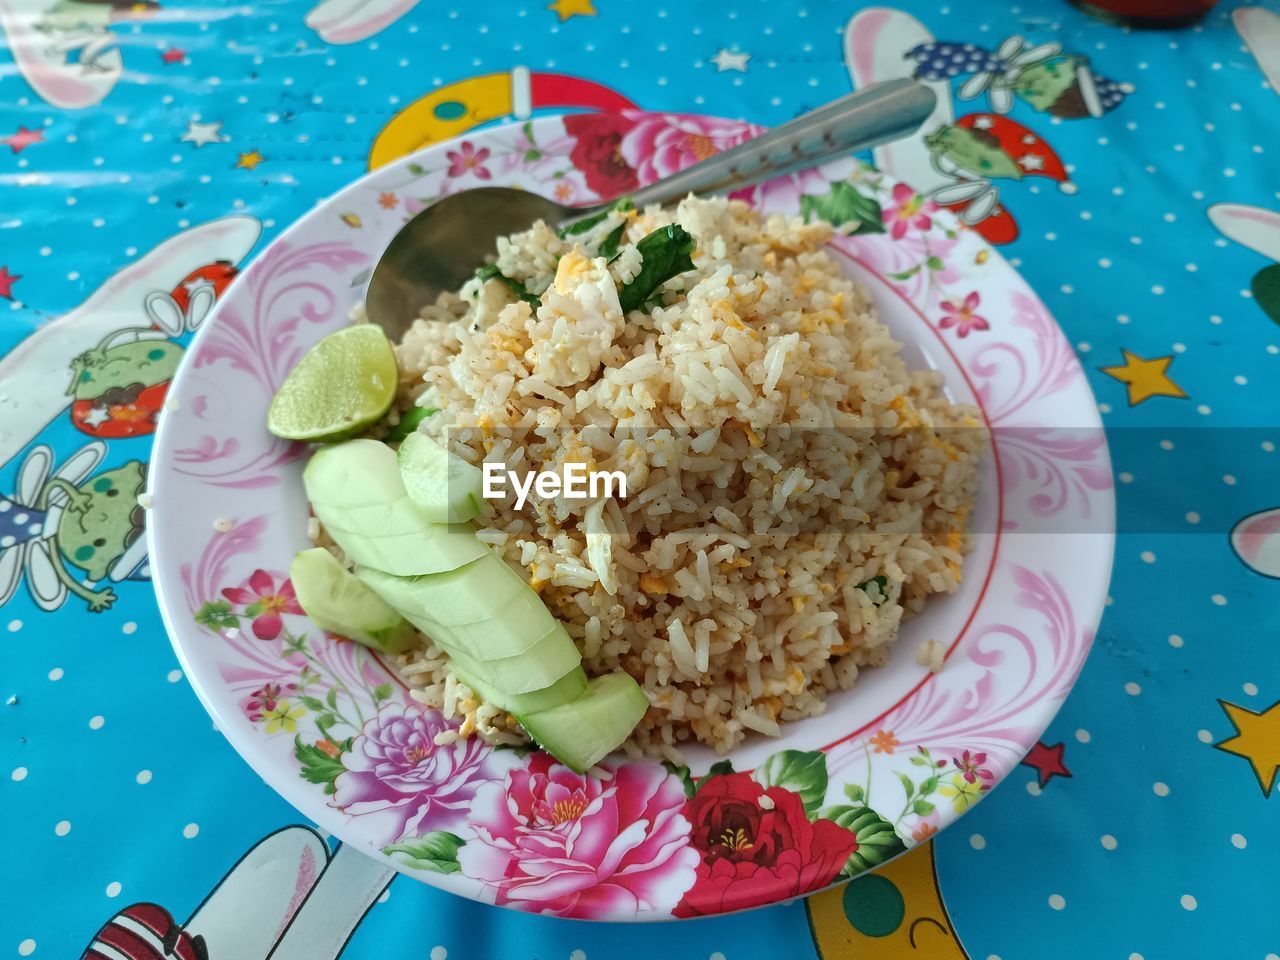 fried rice street food Thailand Street Food Thailand Comfort Food Plate Vegetarian Food Blue Directly Above Appetizer Gourmet Table Rice - Food Staple Serving Dish Food Styling